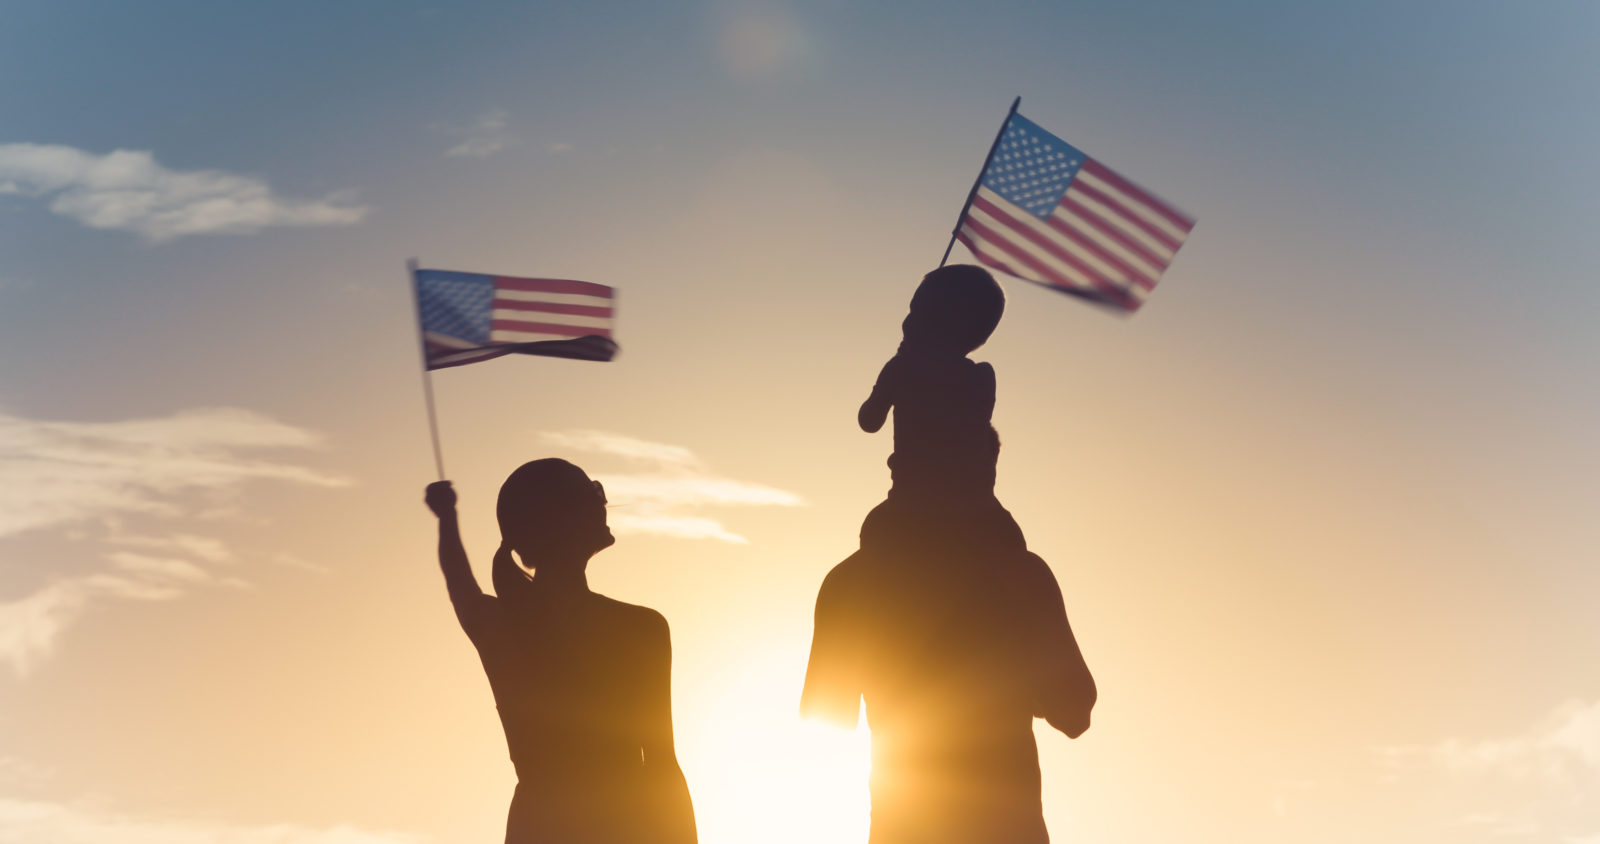 Patriotic man, woman, and child waving American flags in the air.